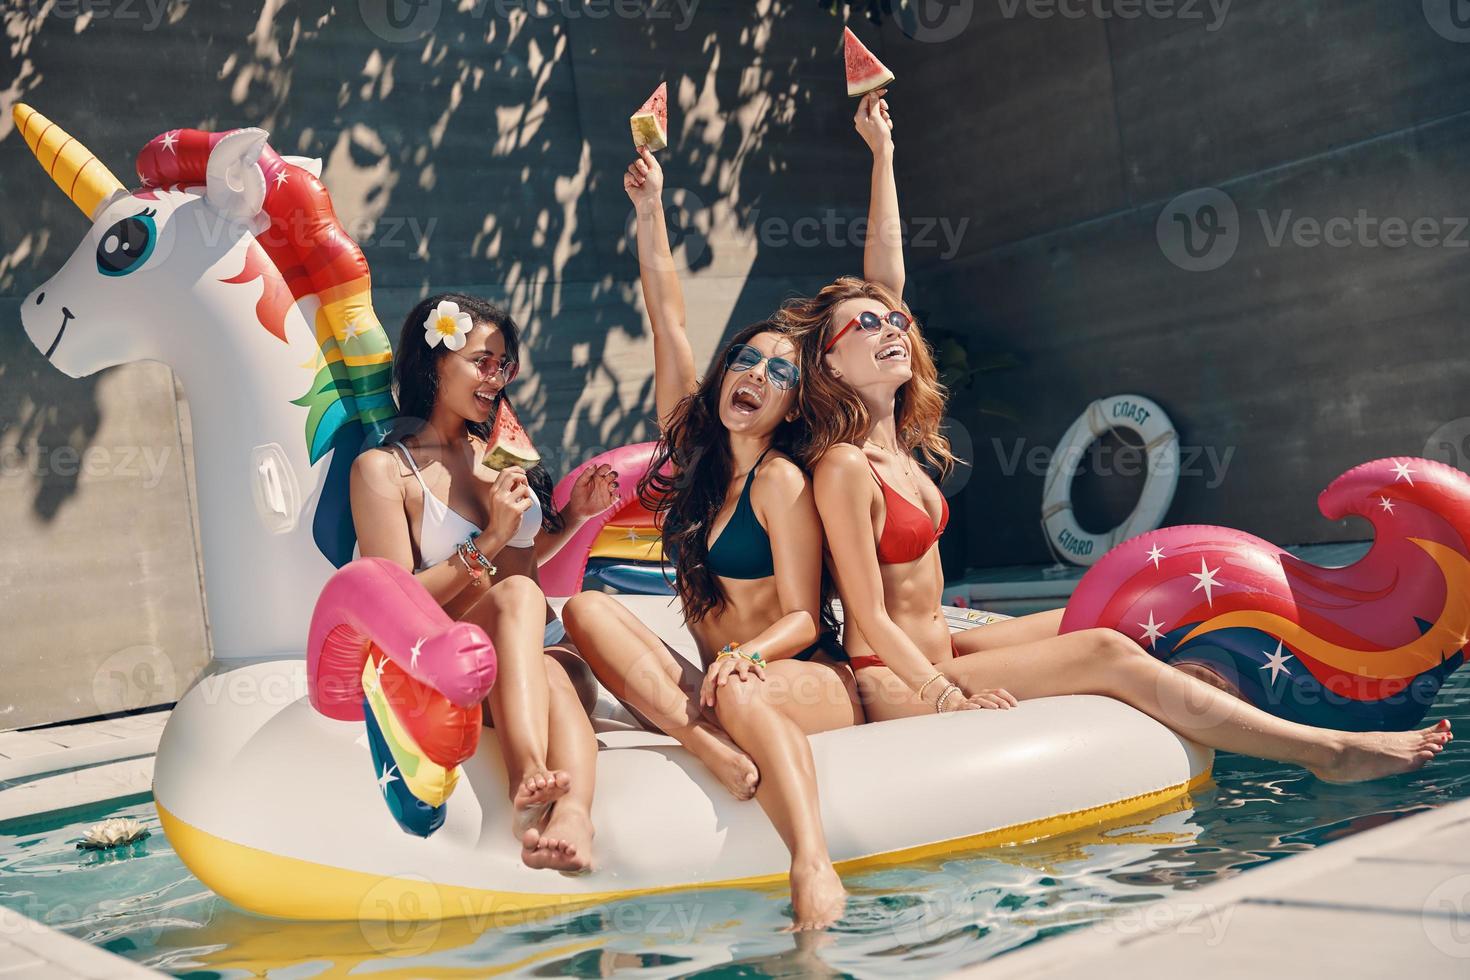 Attractive young women in swimwear smiling and eating watermelon while floating on inflatable unicorn in swimming pool outdoors photo